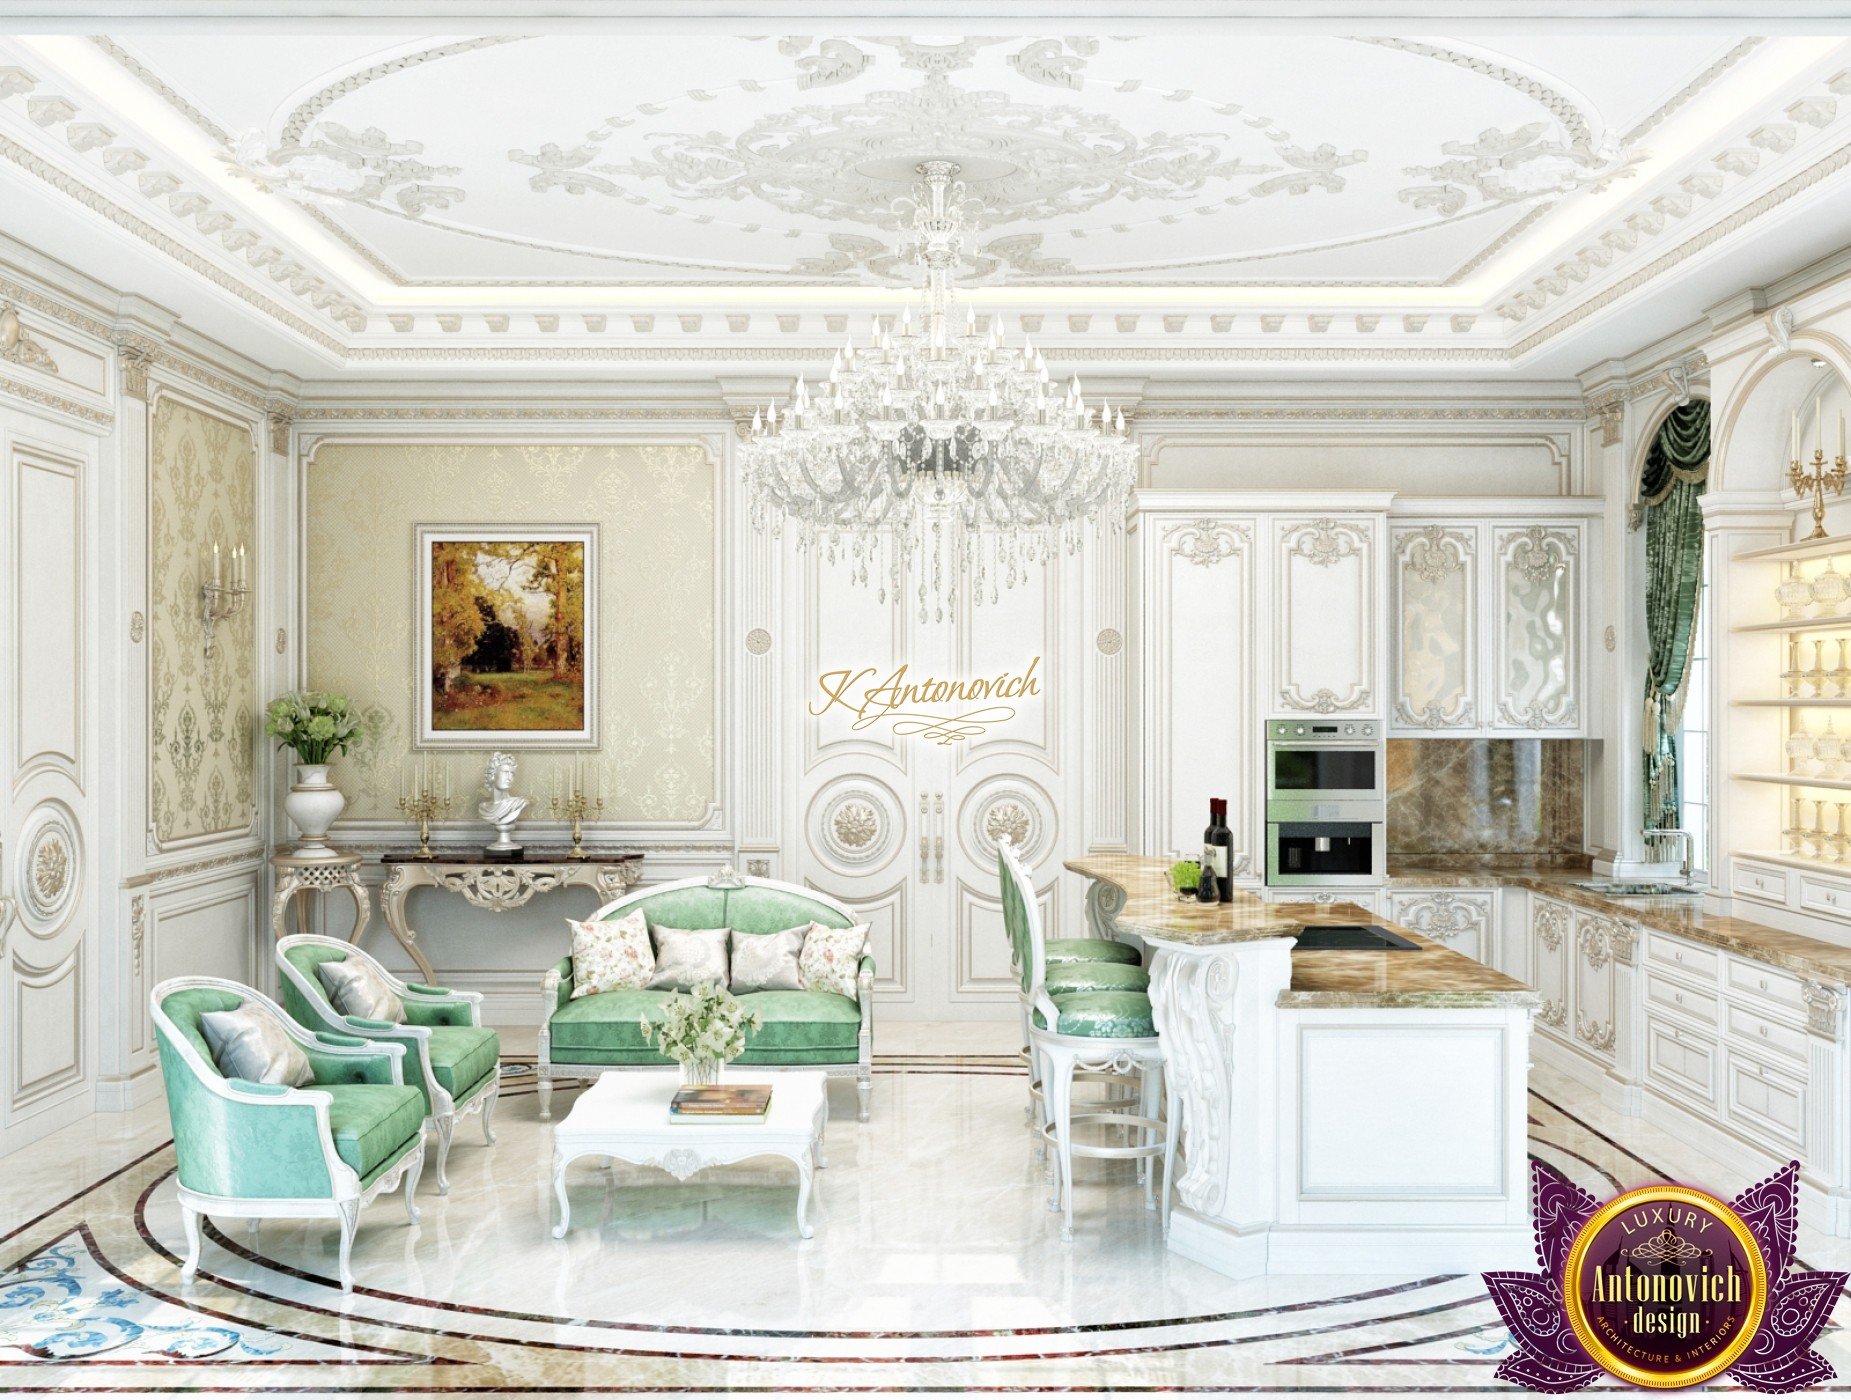 royal kitchen and home design